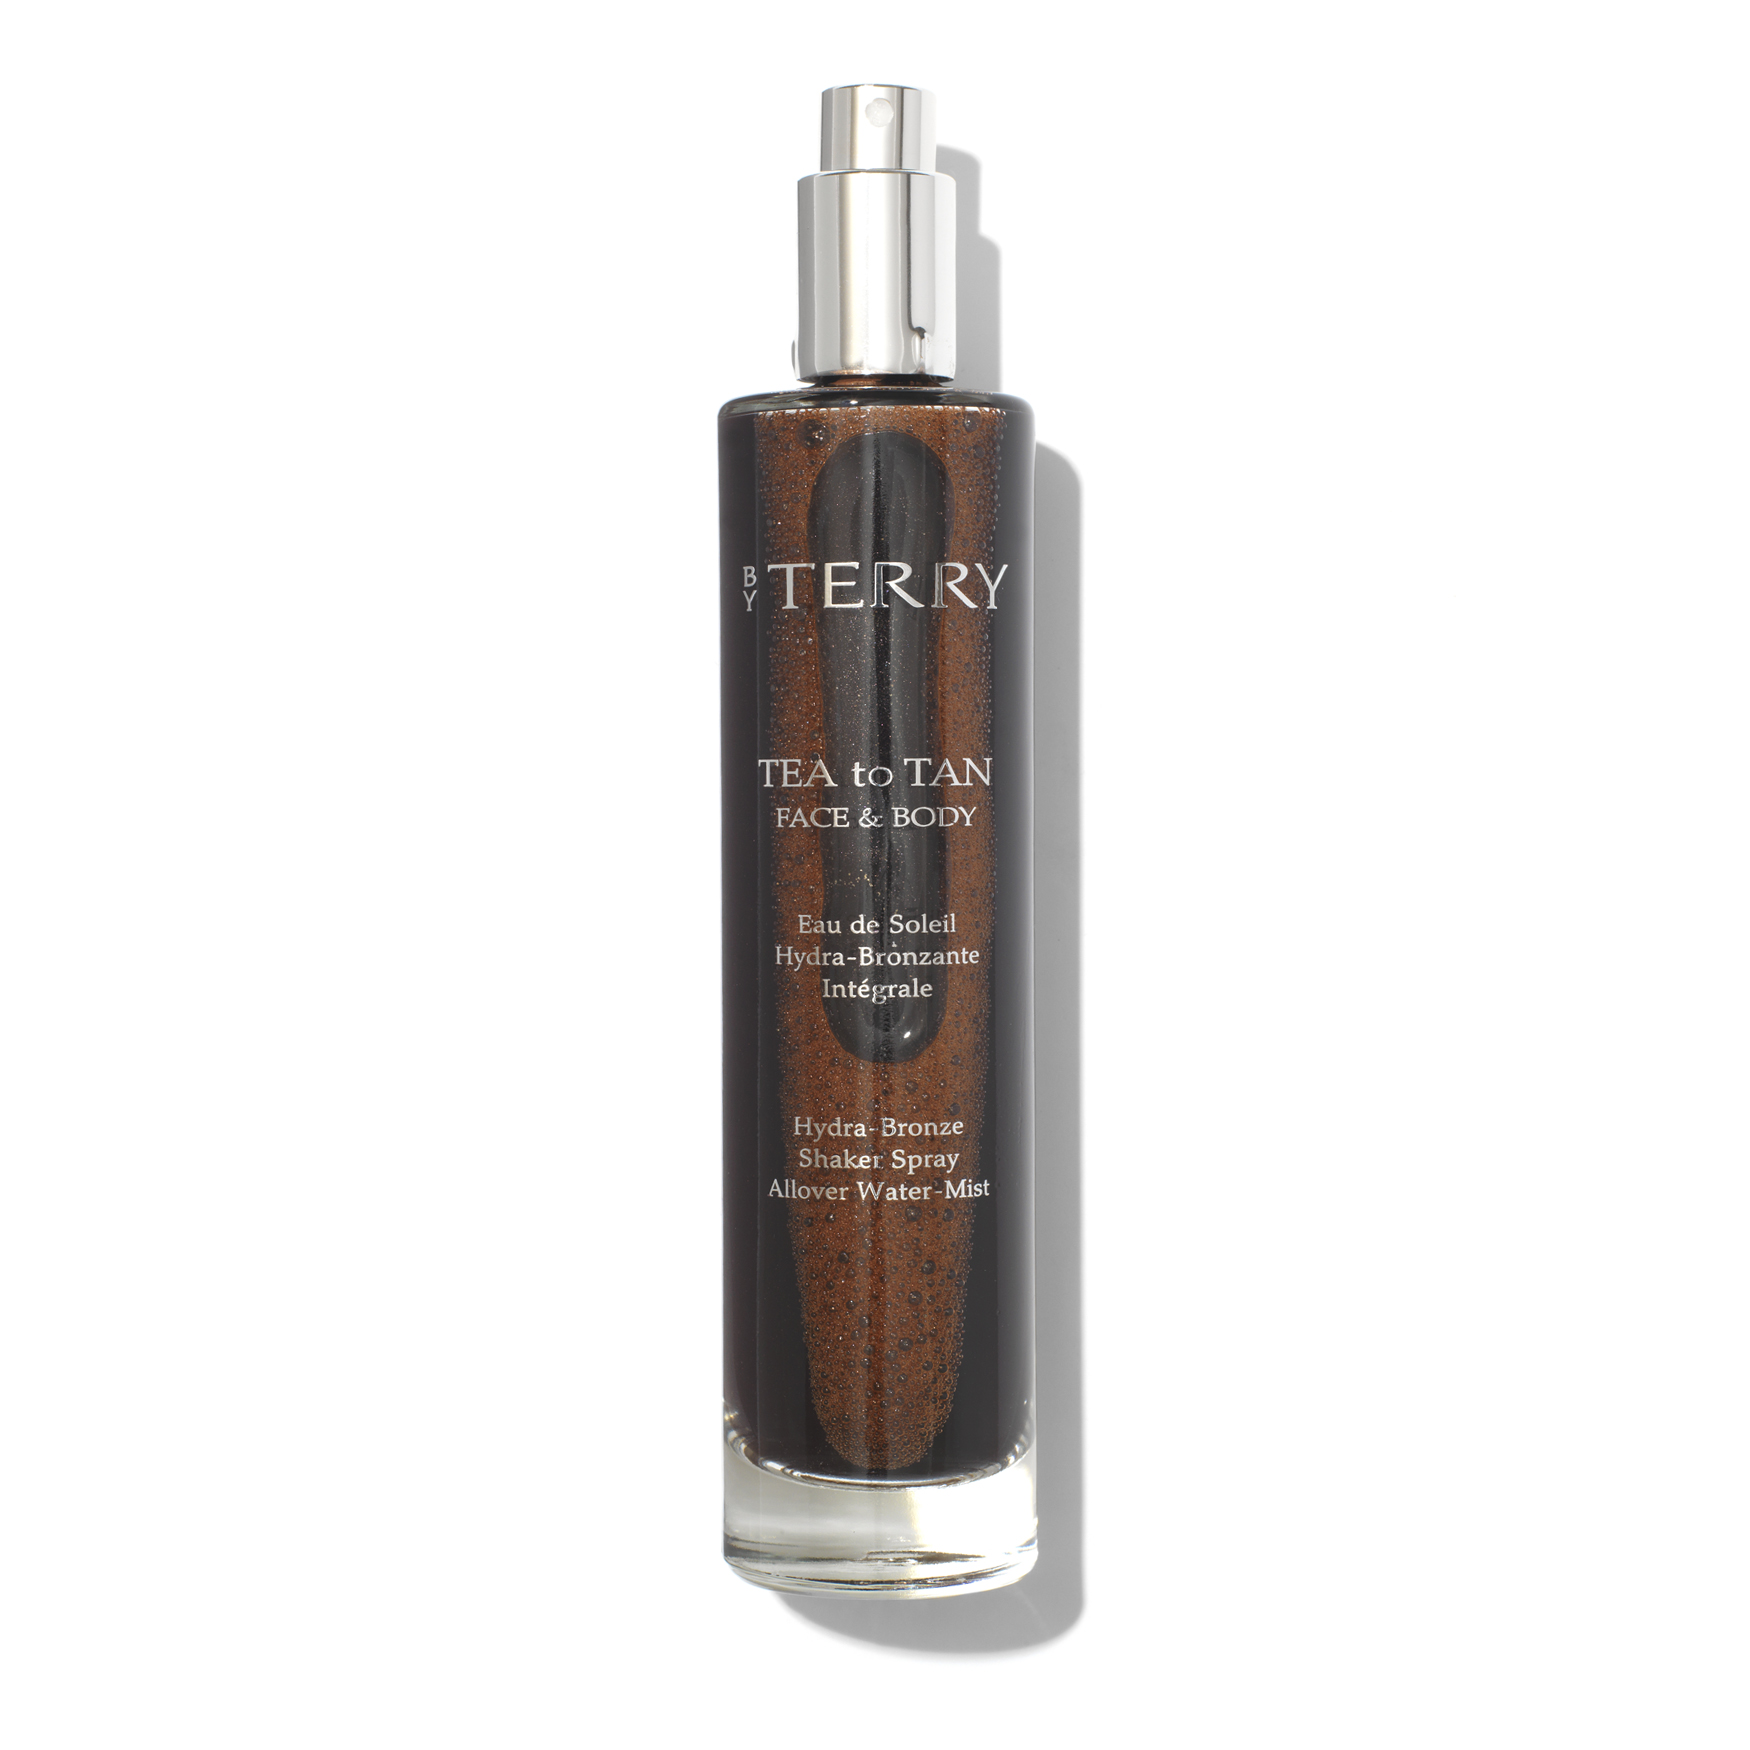 By Terry Tea to Tan Face and Body | Space NK